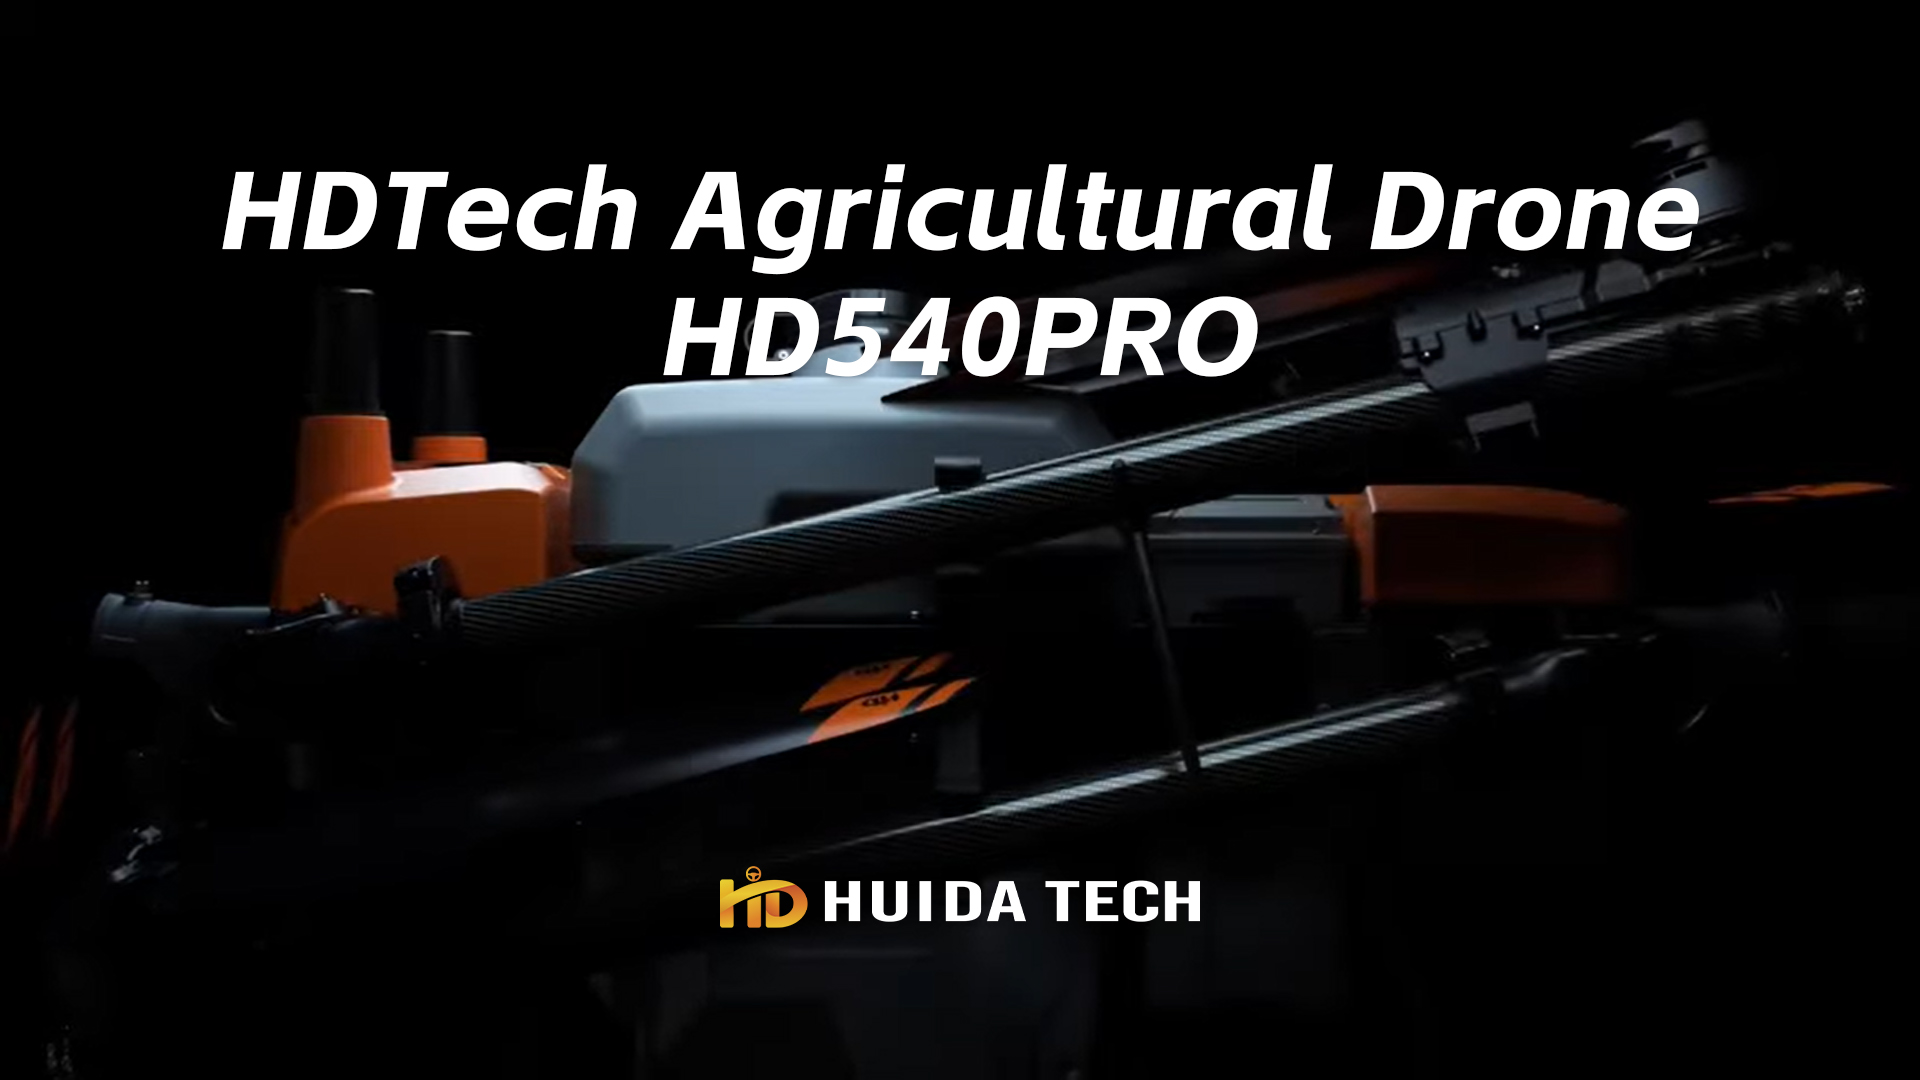 HD 540 PRO Introduction